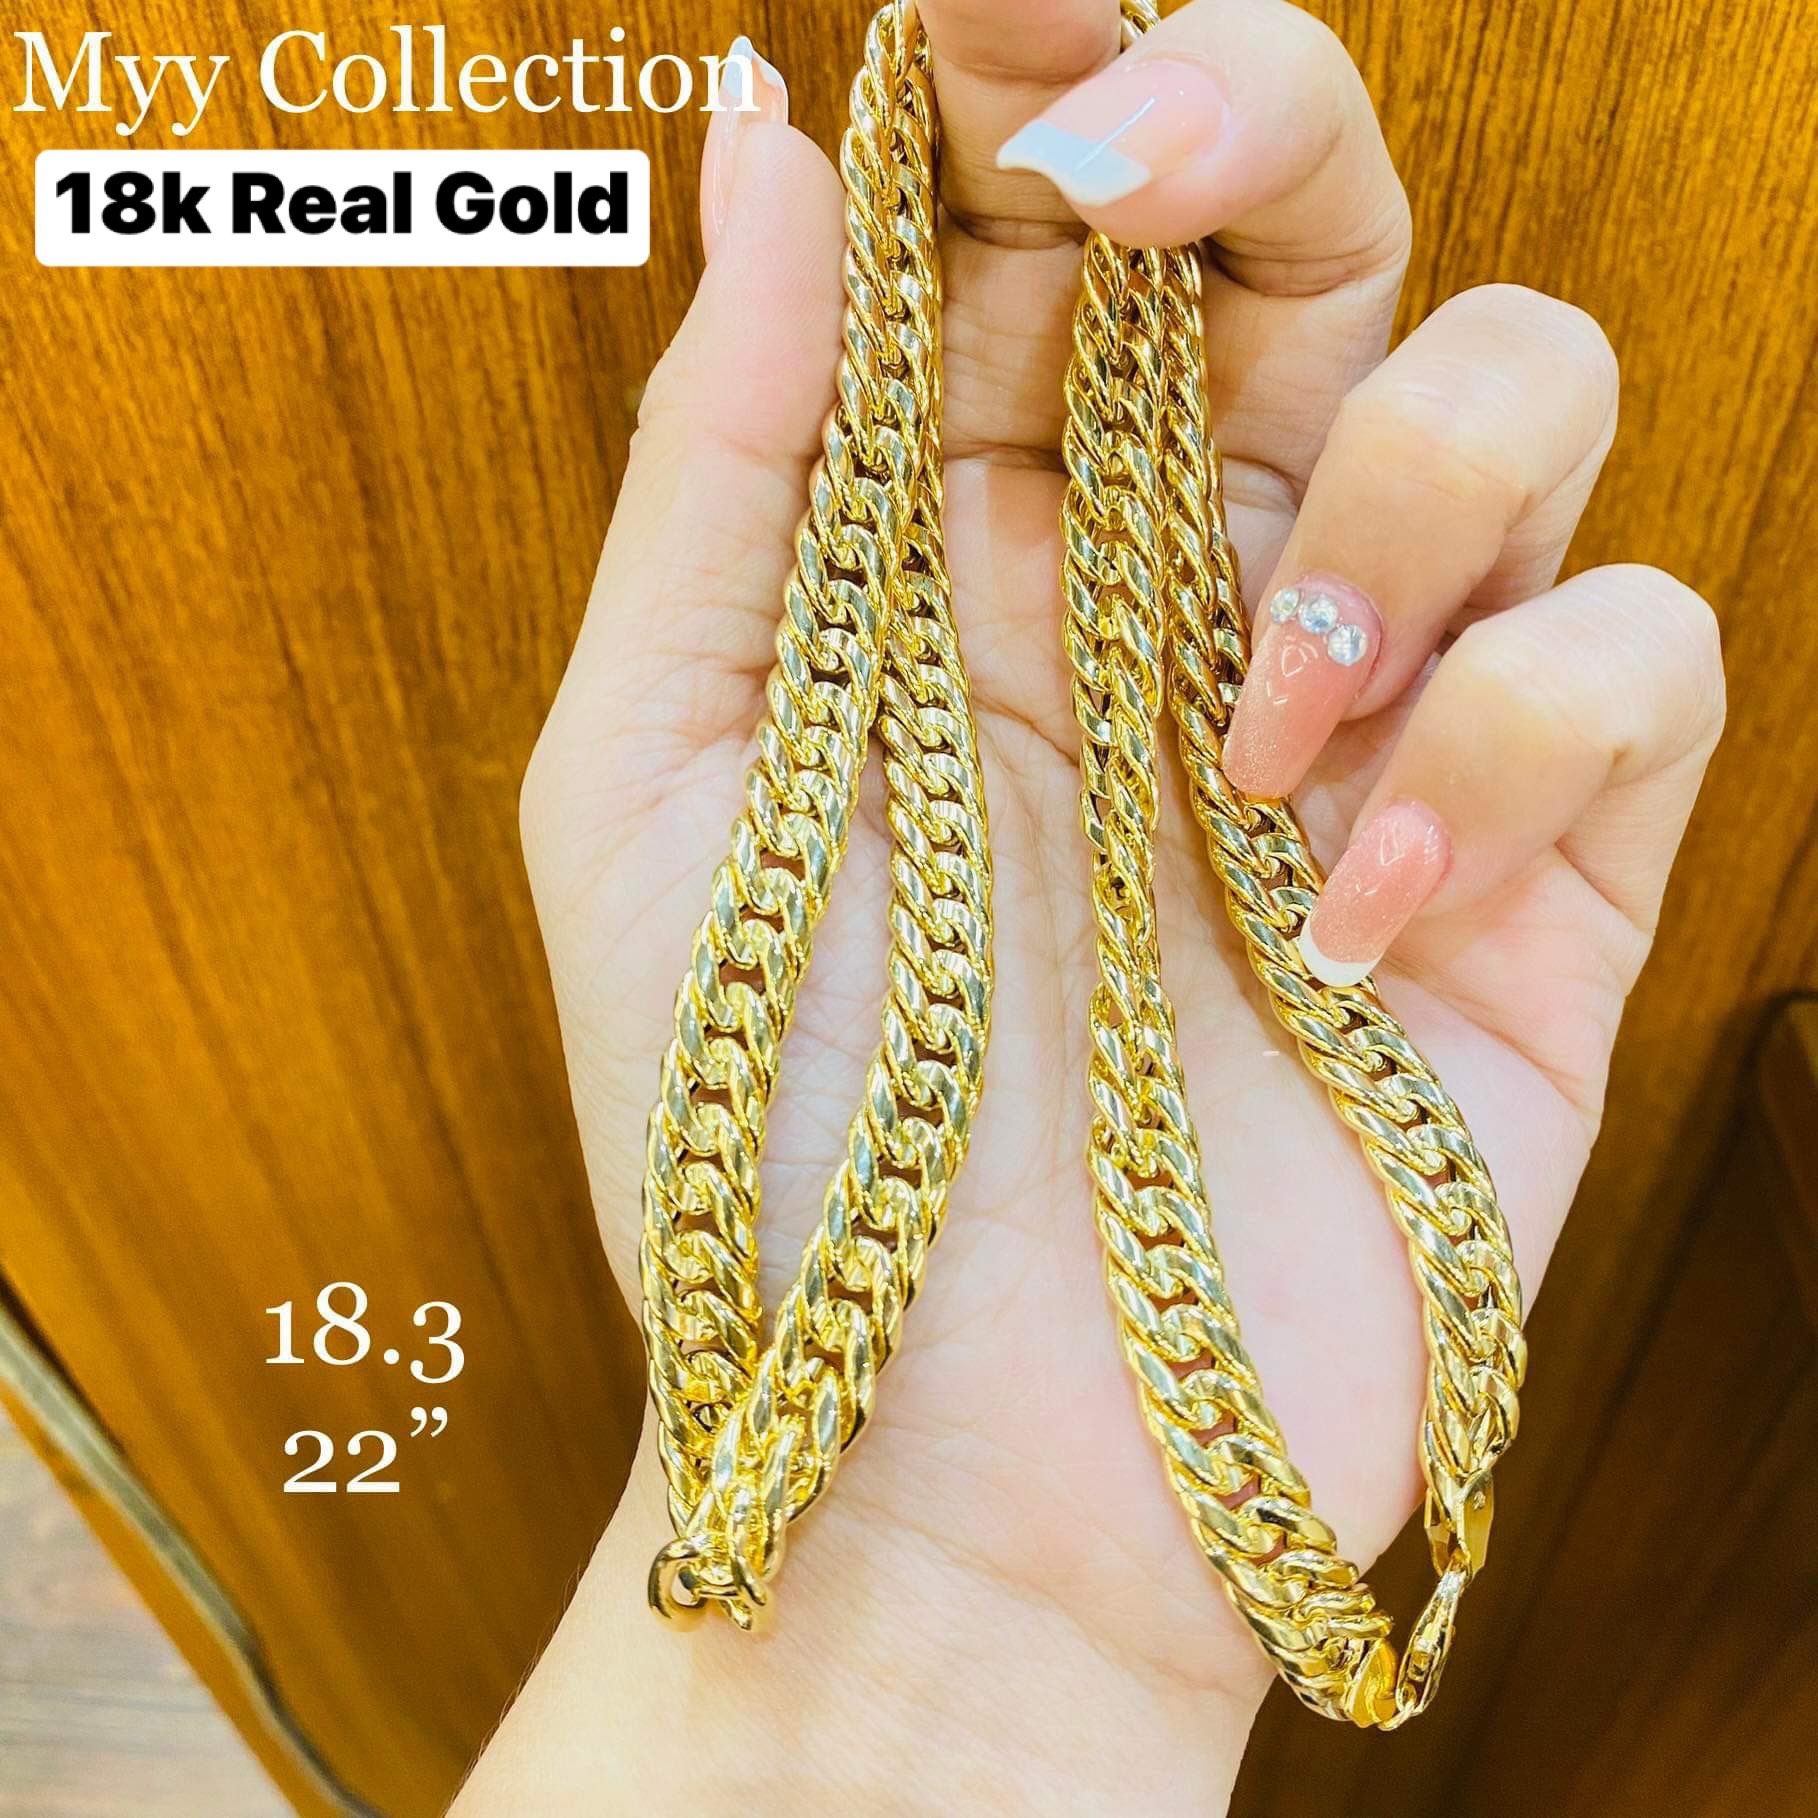 18k Real Saudi Gold Necklace Chain for Sale in Colma, CA - OfferUp